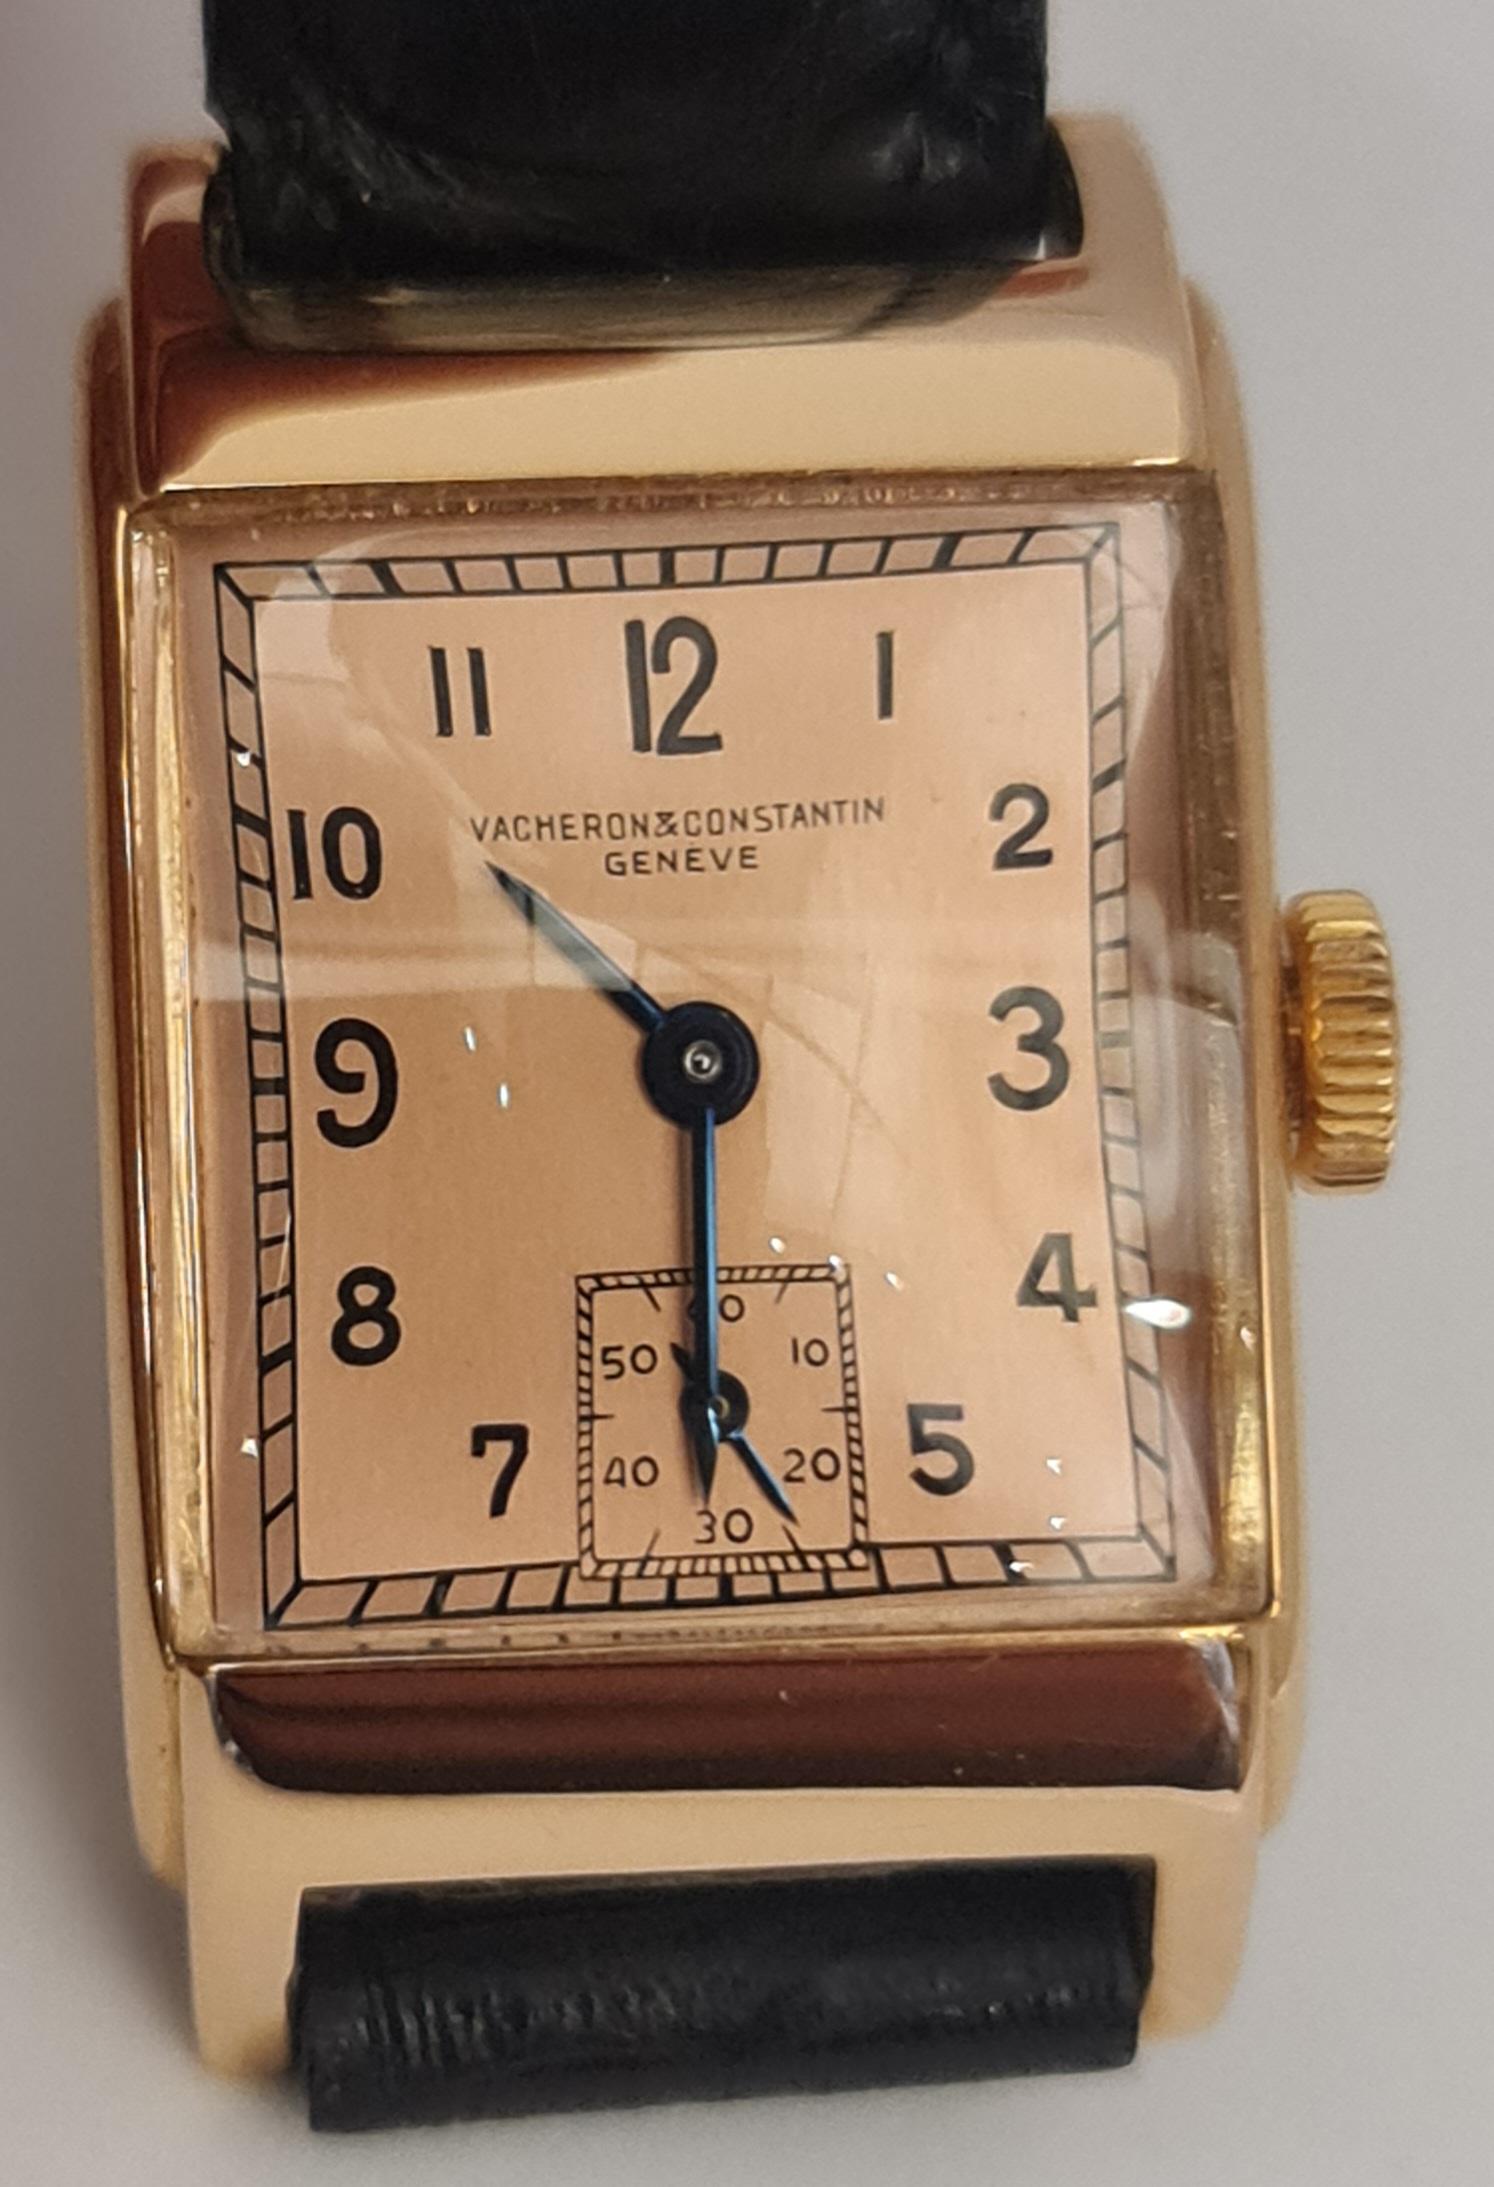 18kt Pink Gold Vacheron Constantin in Excellent Condition from 1935 !

Movement: mechanical with hand winding

Functions: Hours, minutes, subsidiary seconds

Case: 18kt pink gold, Measurements 21 mm x 28.6 mm x 8.7 mm mineral glass, snap on